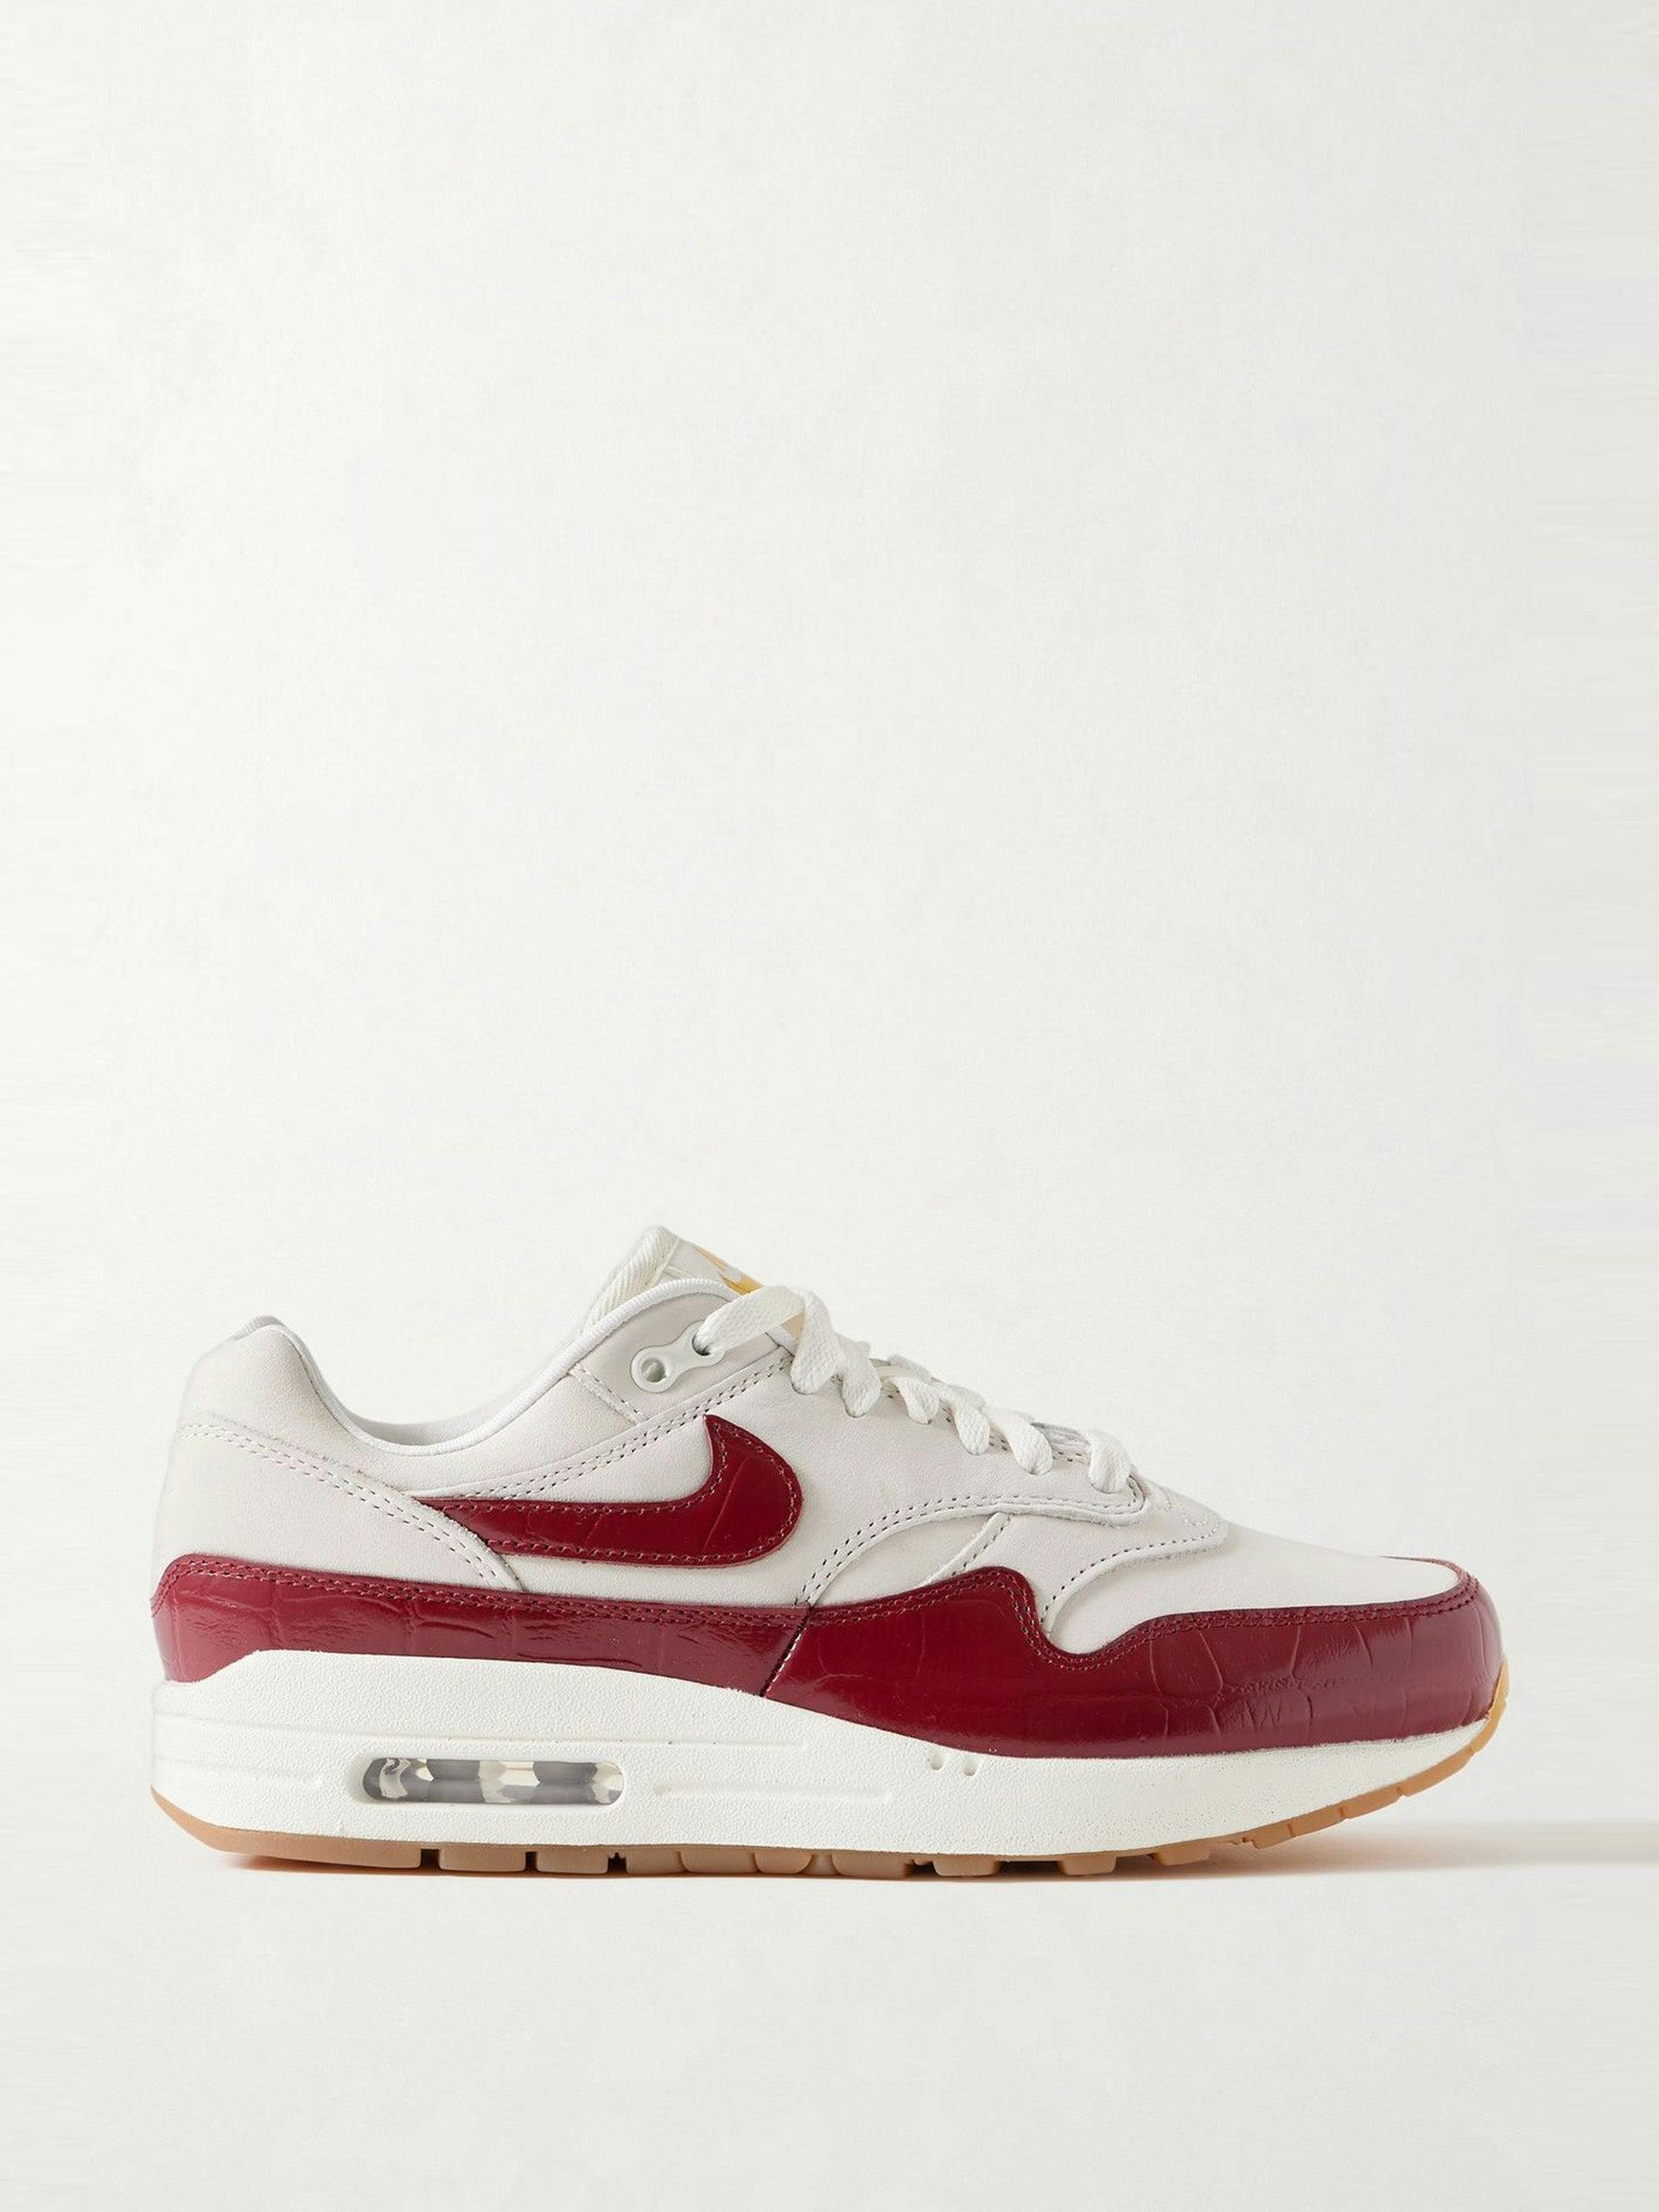 Air Max croc-effect leather-trimmed suede sneakers